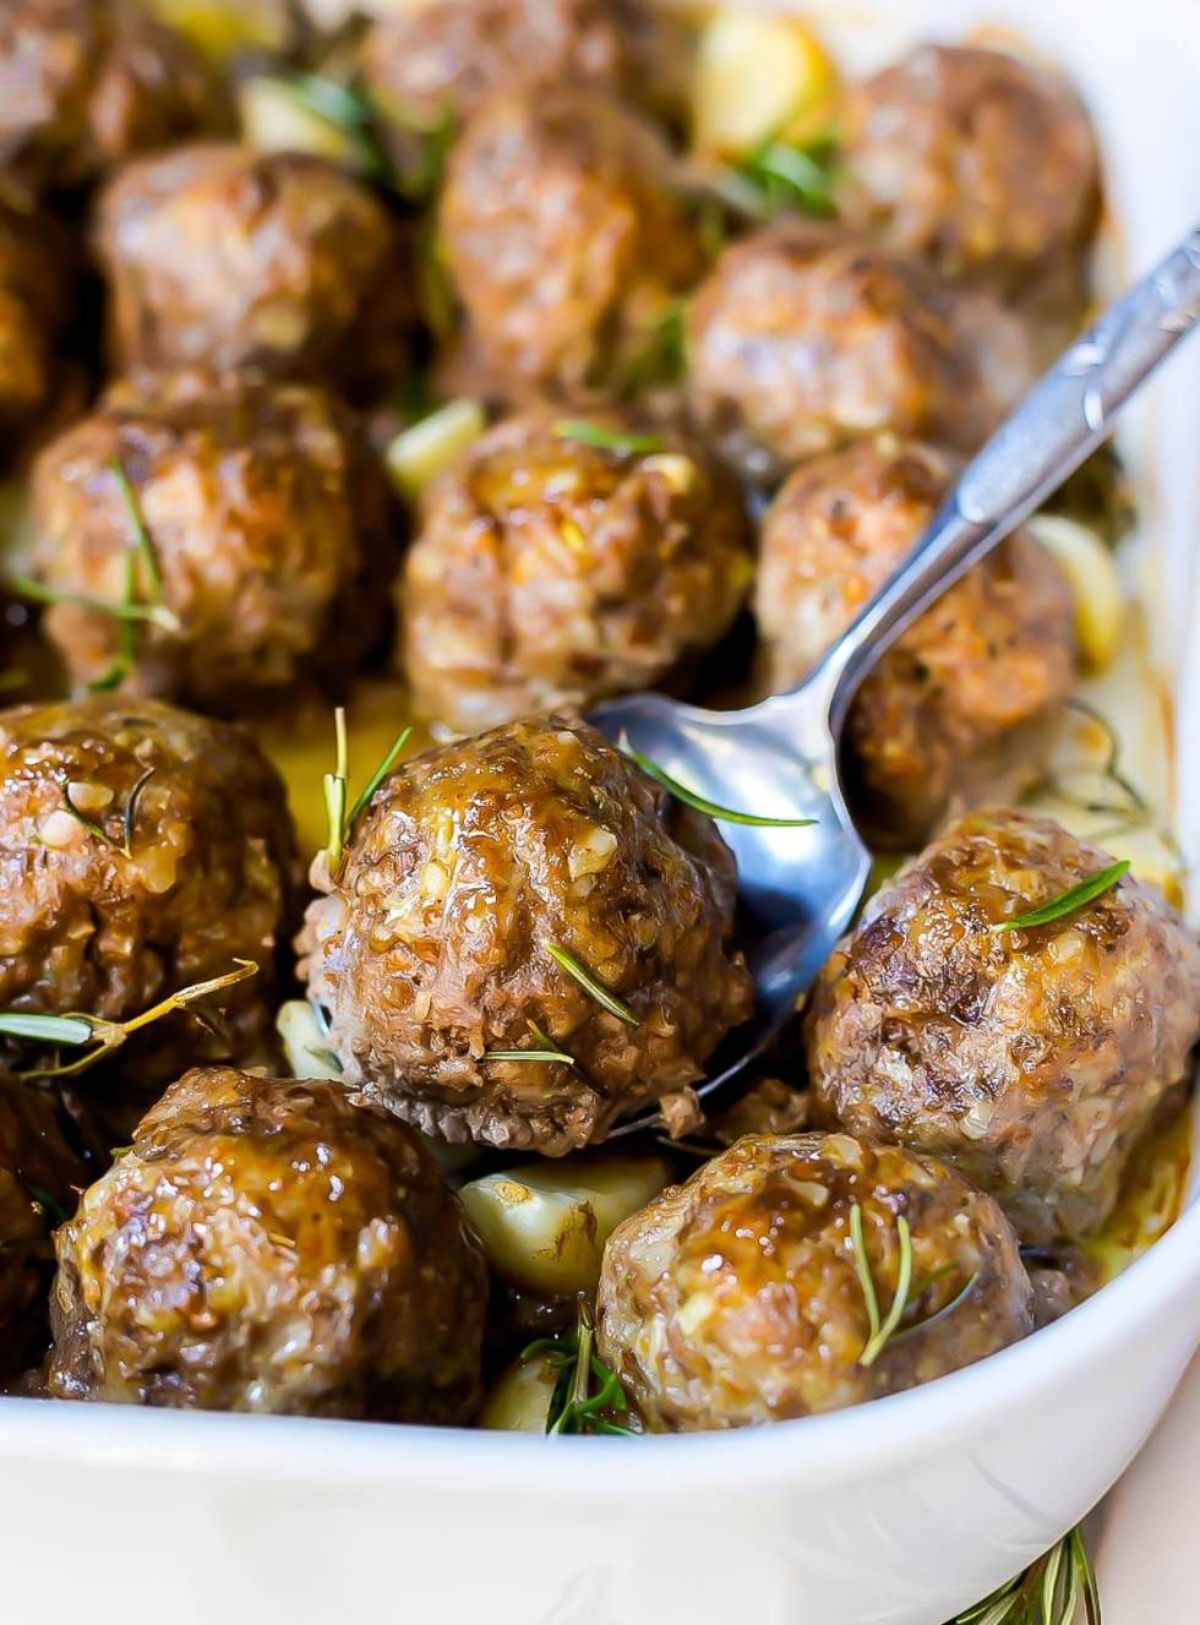 A close up of a dish of meatballs with a spoon lifitng one of them out